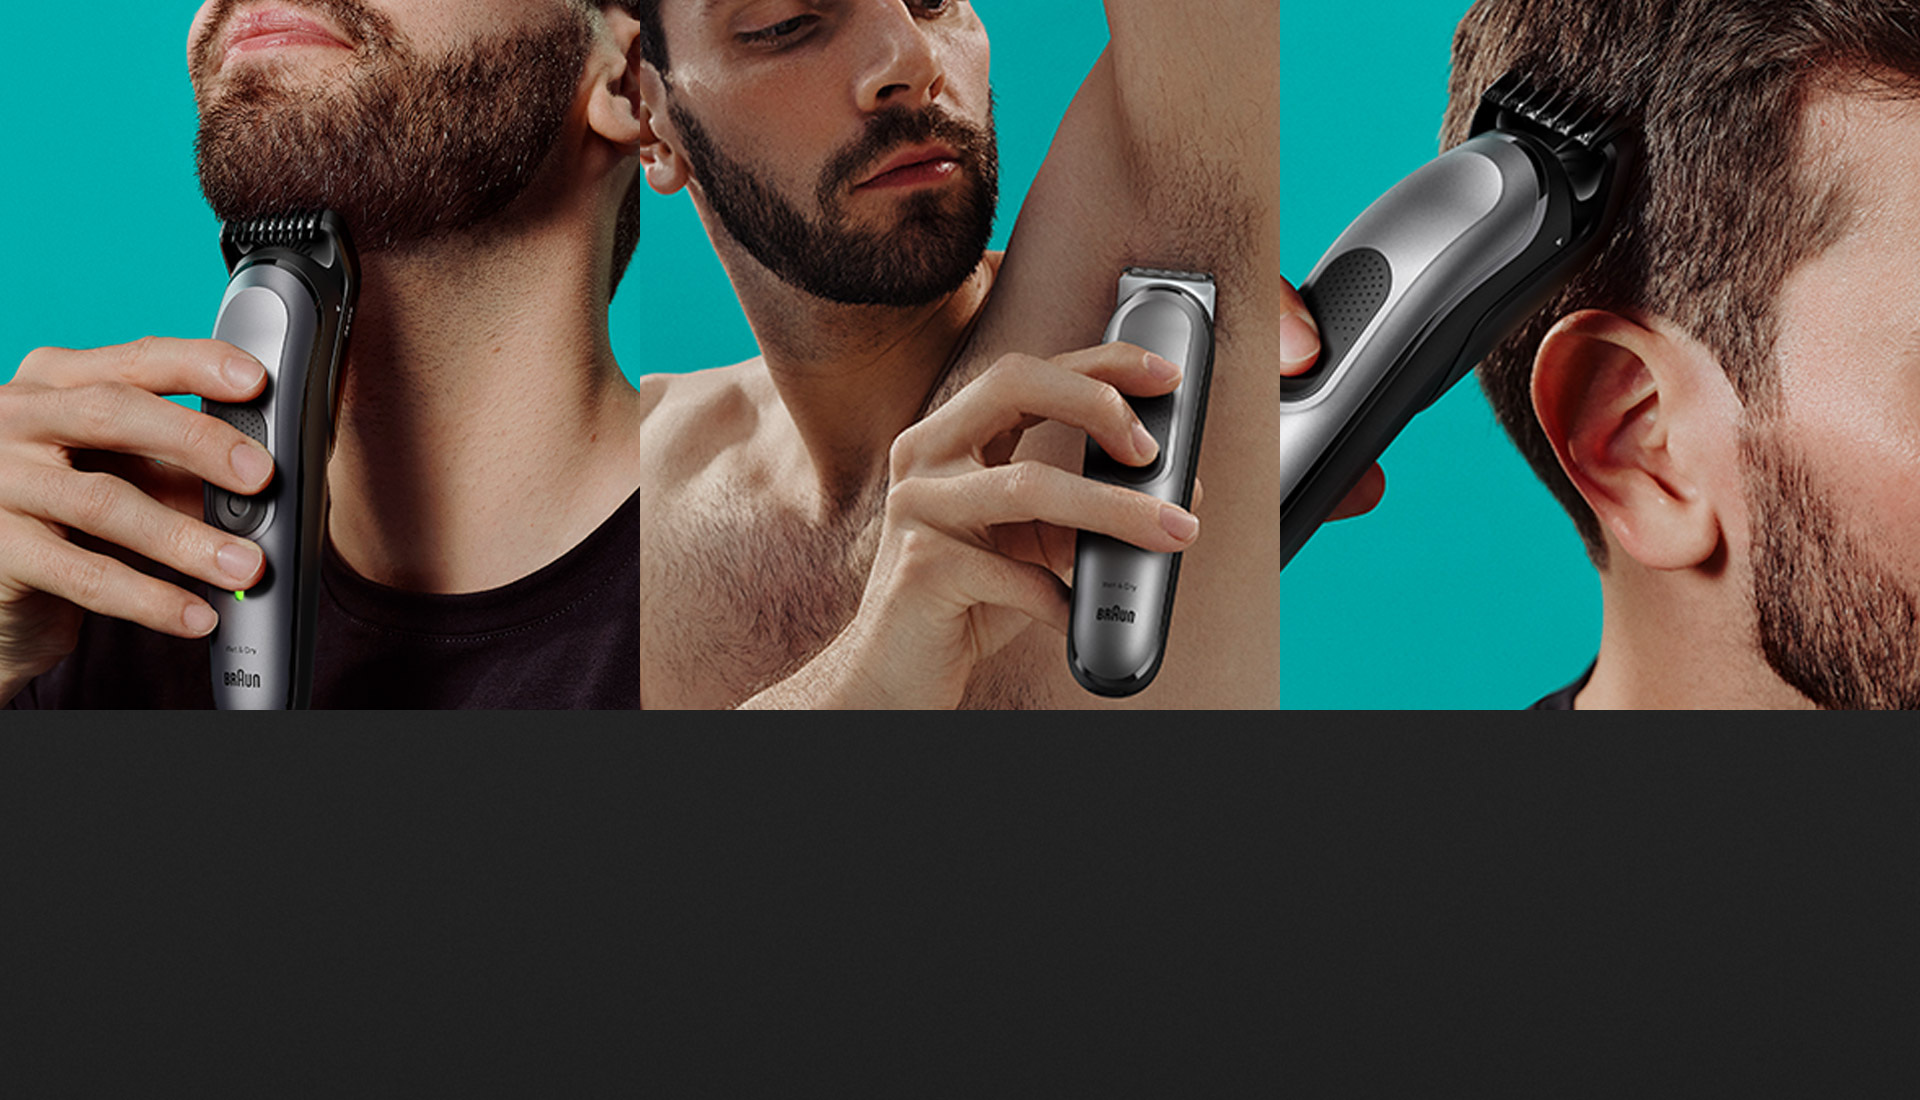 Braun All in one trimmer For Male Grooming